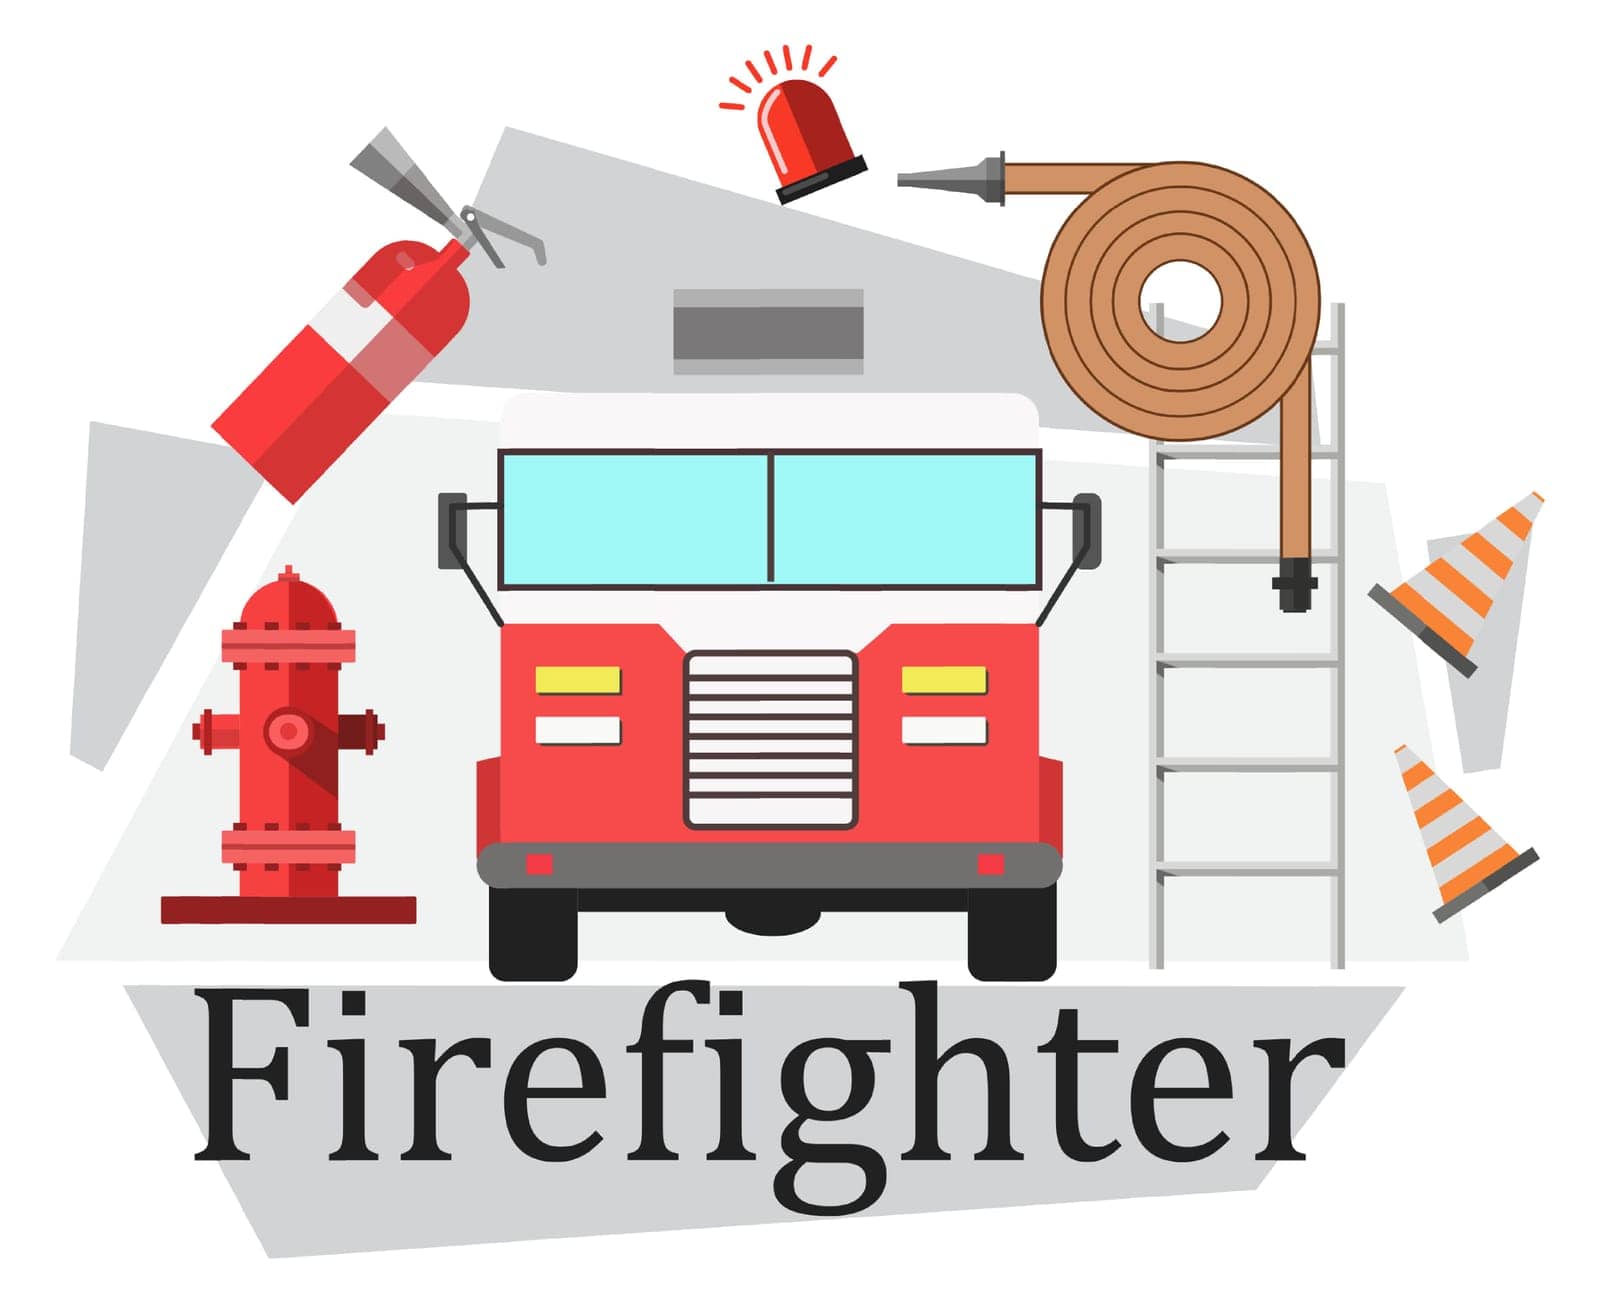 Emergency and firefighting brigade equipment and instruments for extinguishing fire. Hydrant and truck with ladder, hose and plastic cone, alarm with lights. Vector in flat style illustration